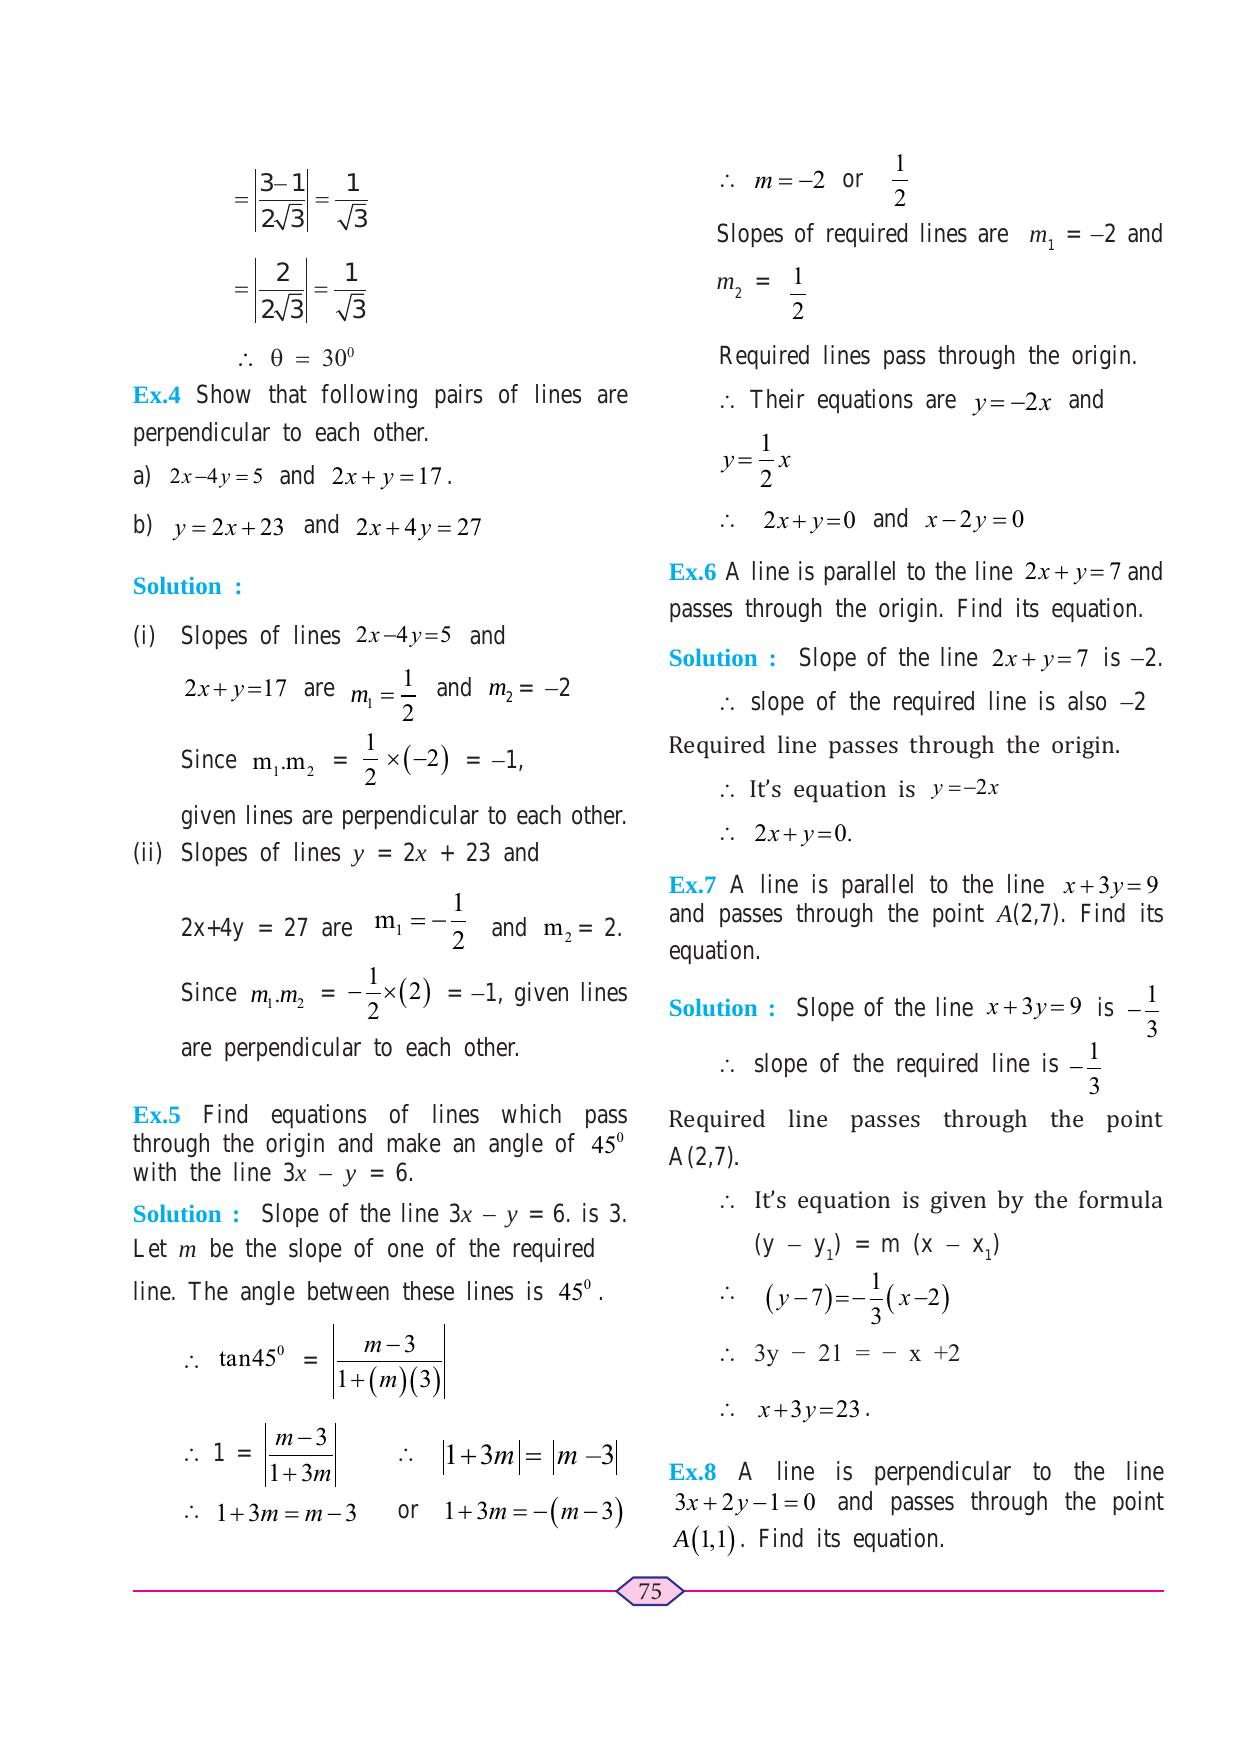 Maharashtra Board Class 11 Maths (Commerce) (Part 1) Textbook - Page 85